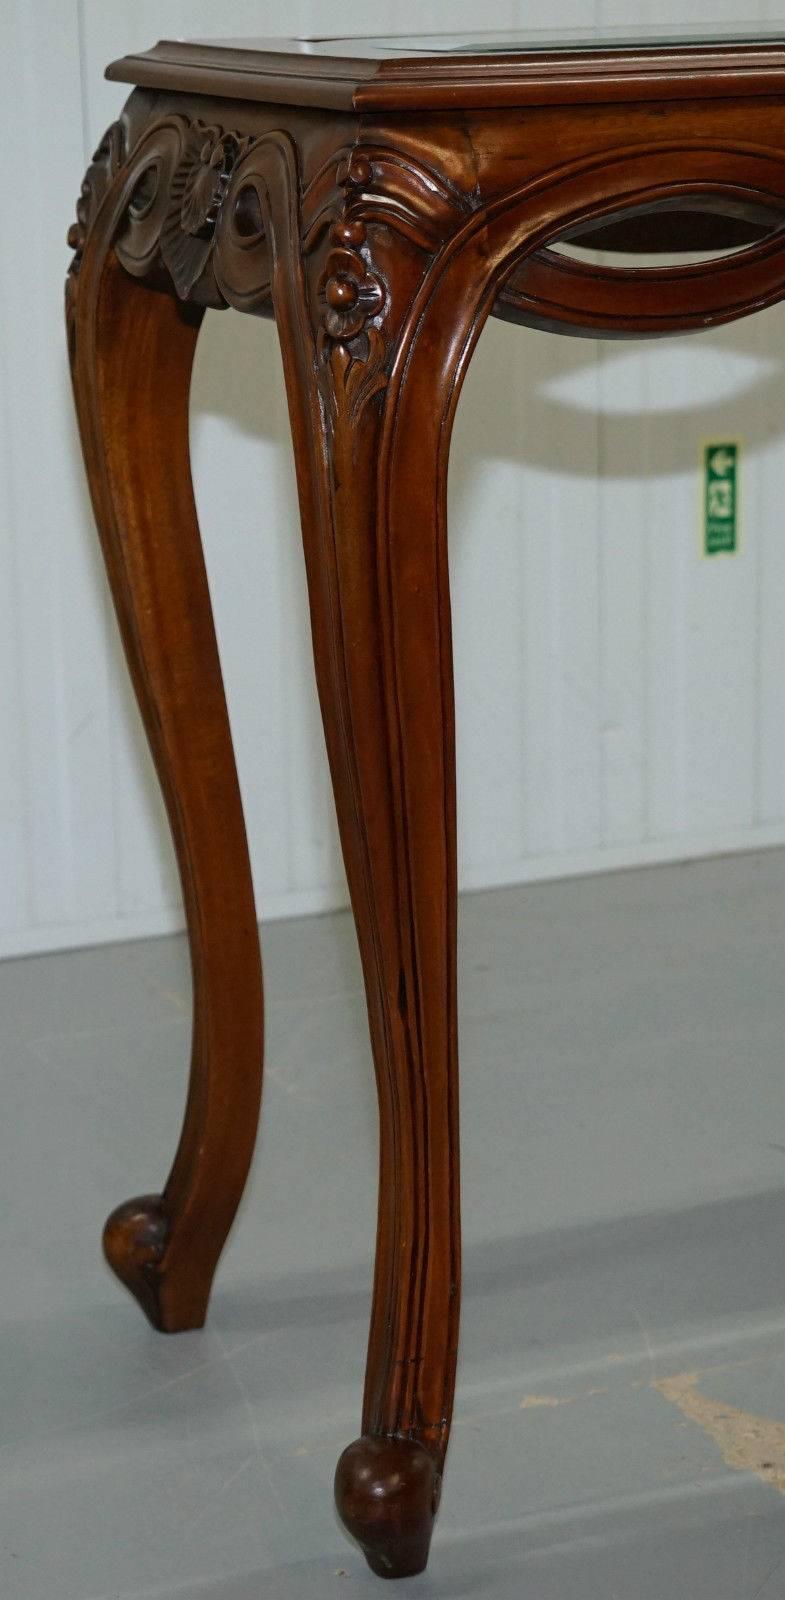 Hand-Carved Stunning Long Elegant Cabriole Legged Console Mahogany Table Beveled Glass Top